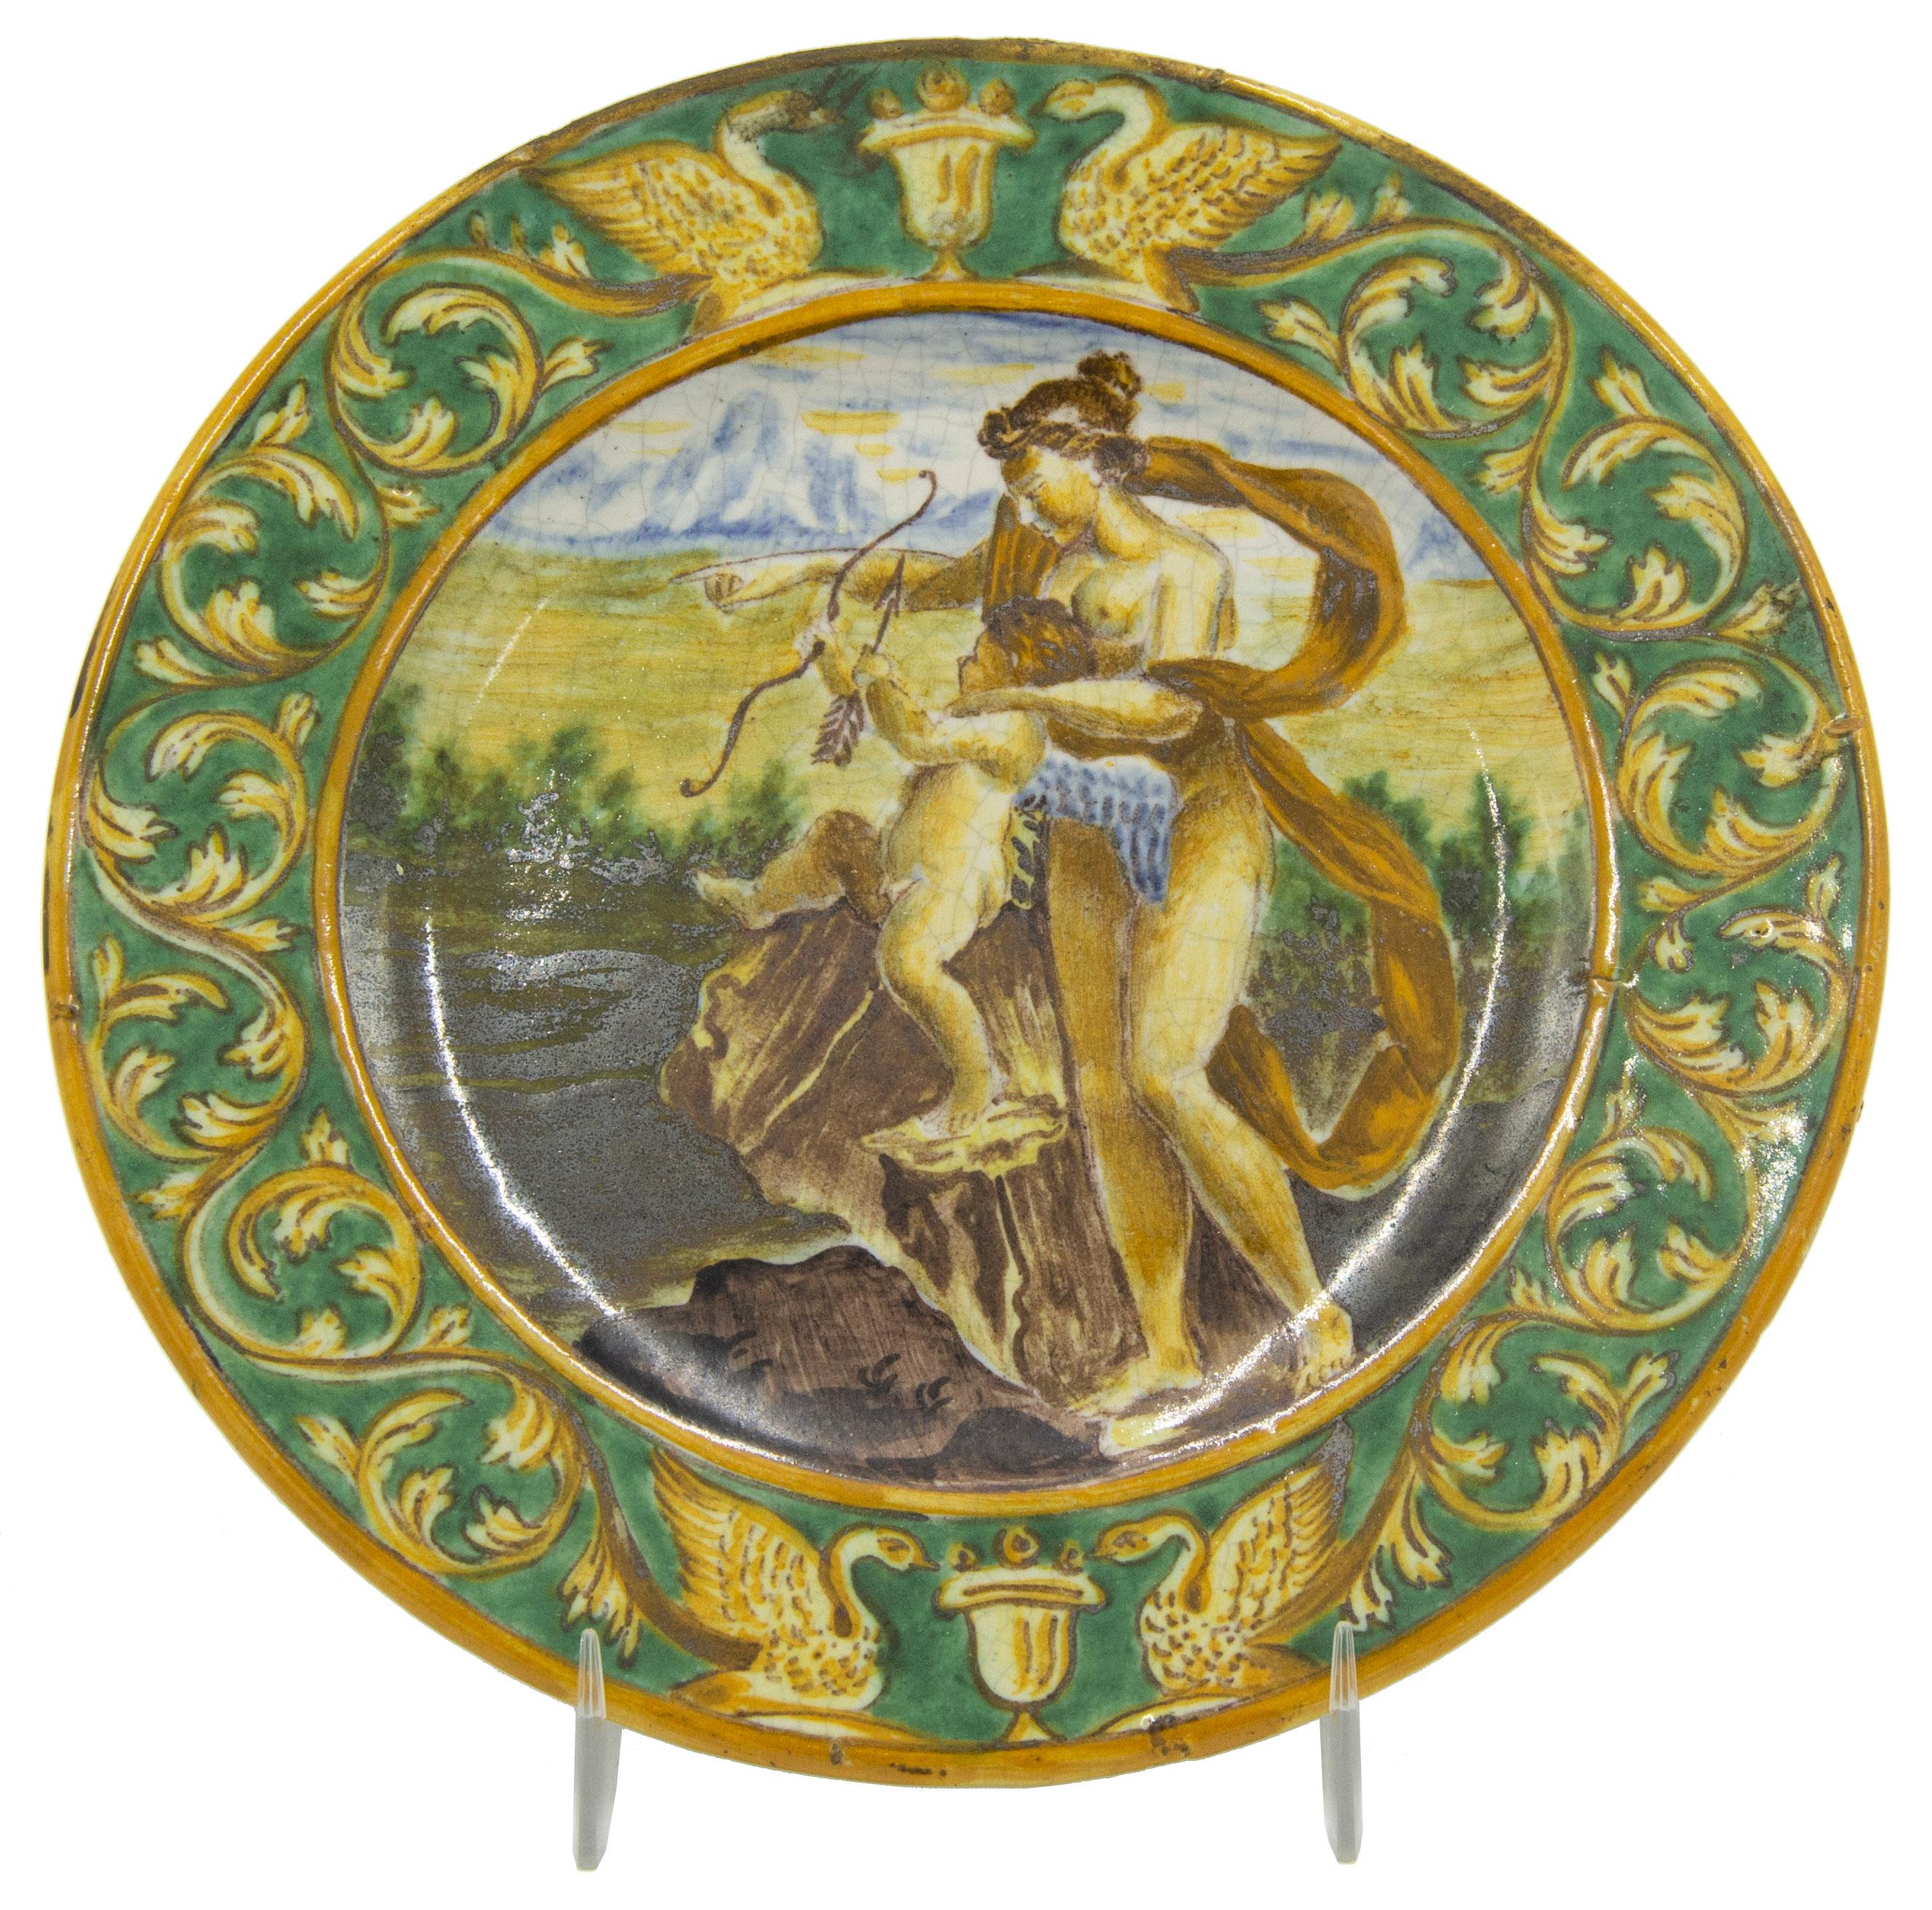 Set of 6 Renaissance Style Majolica Porcelain Plates In Good Condition For Sale In New York, NY